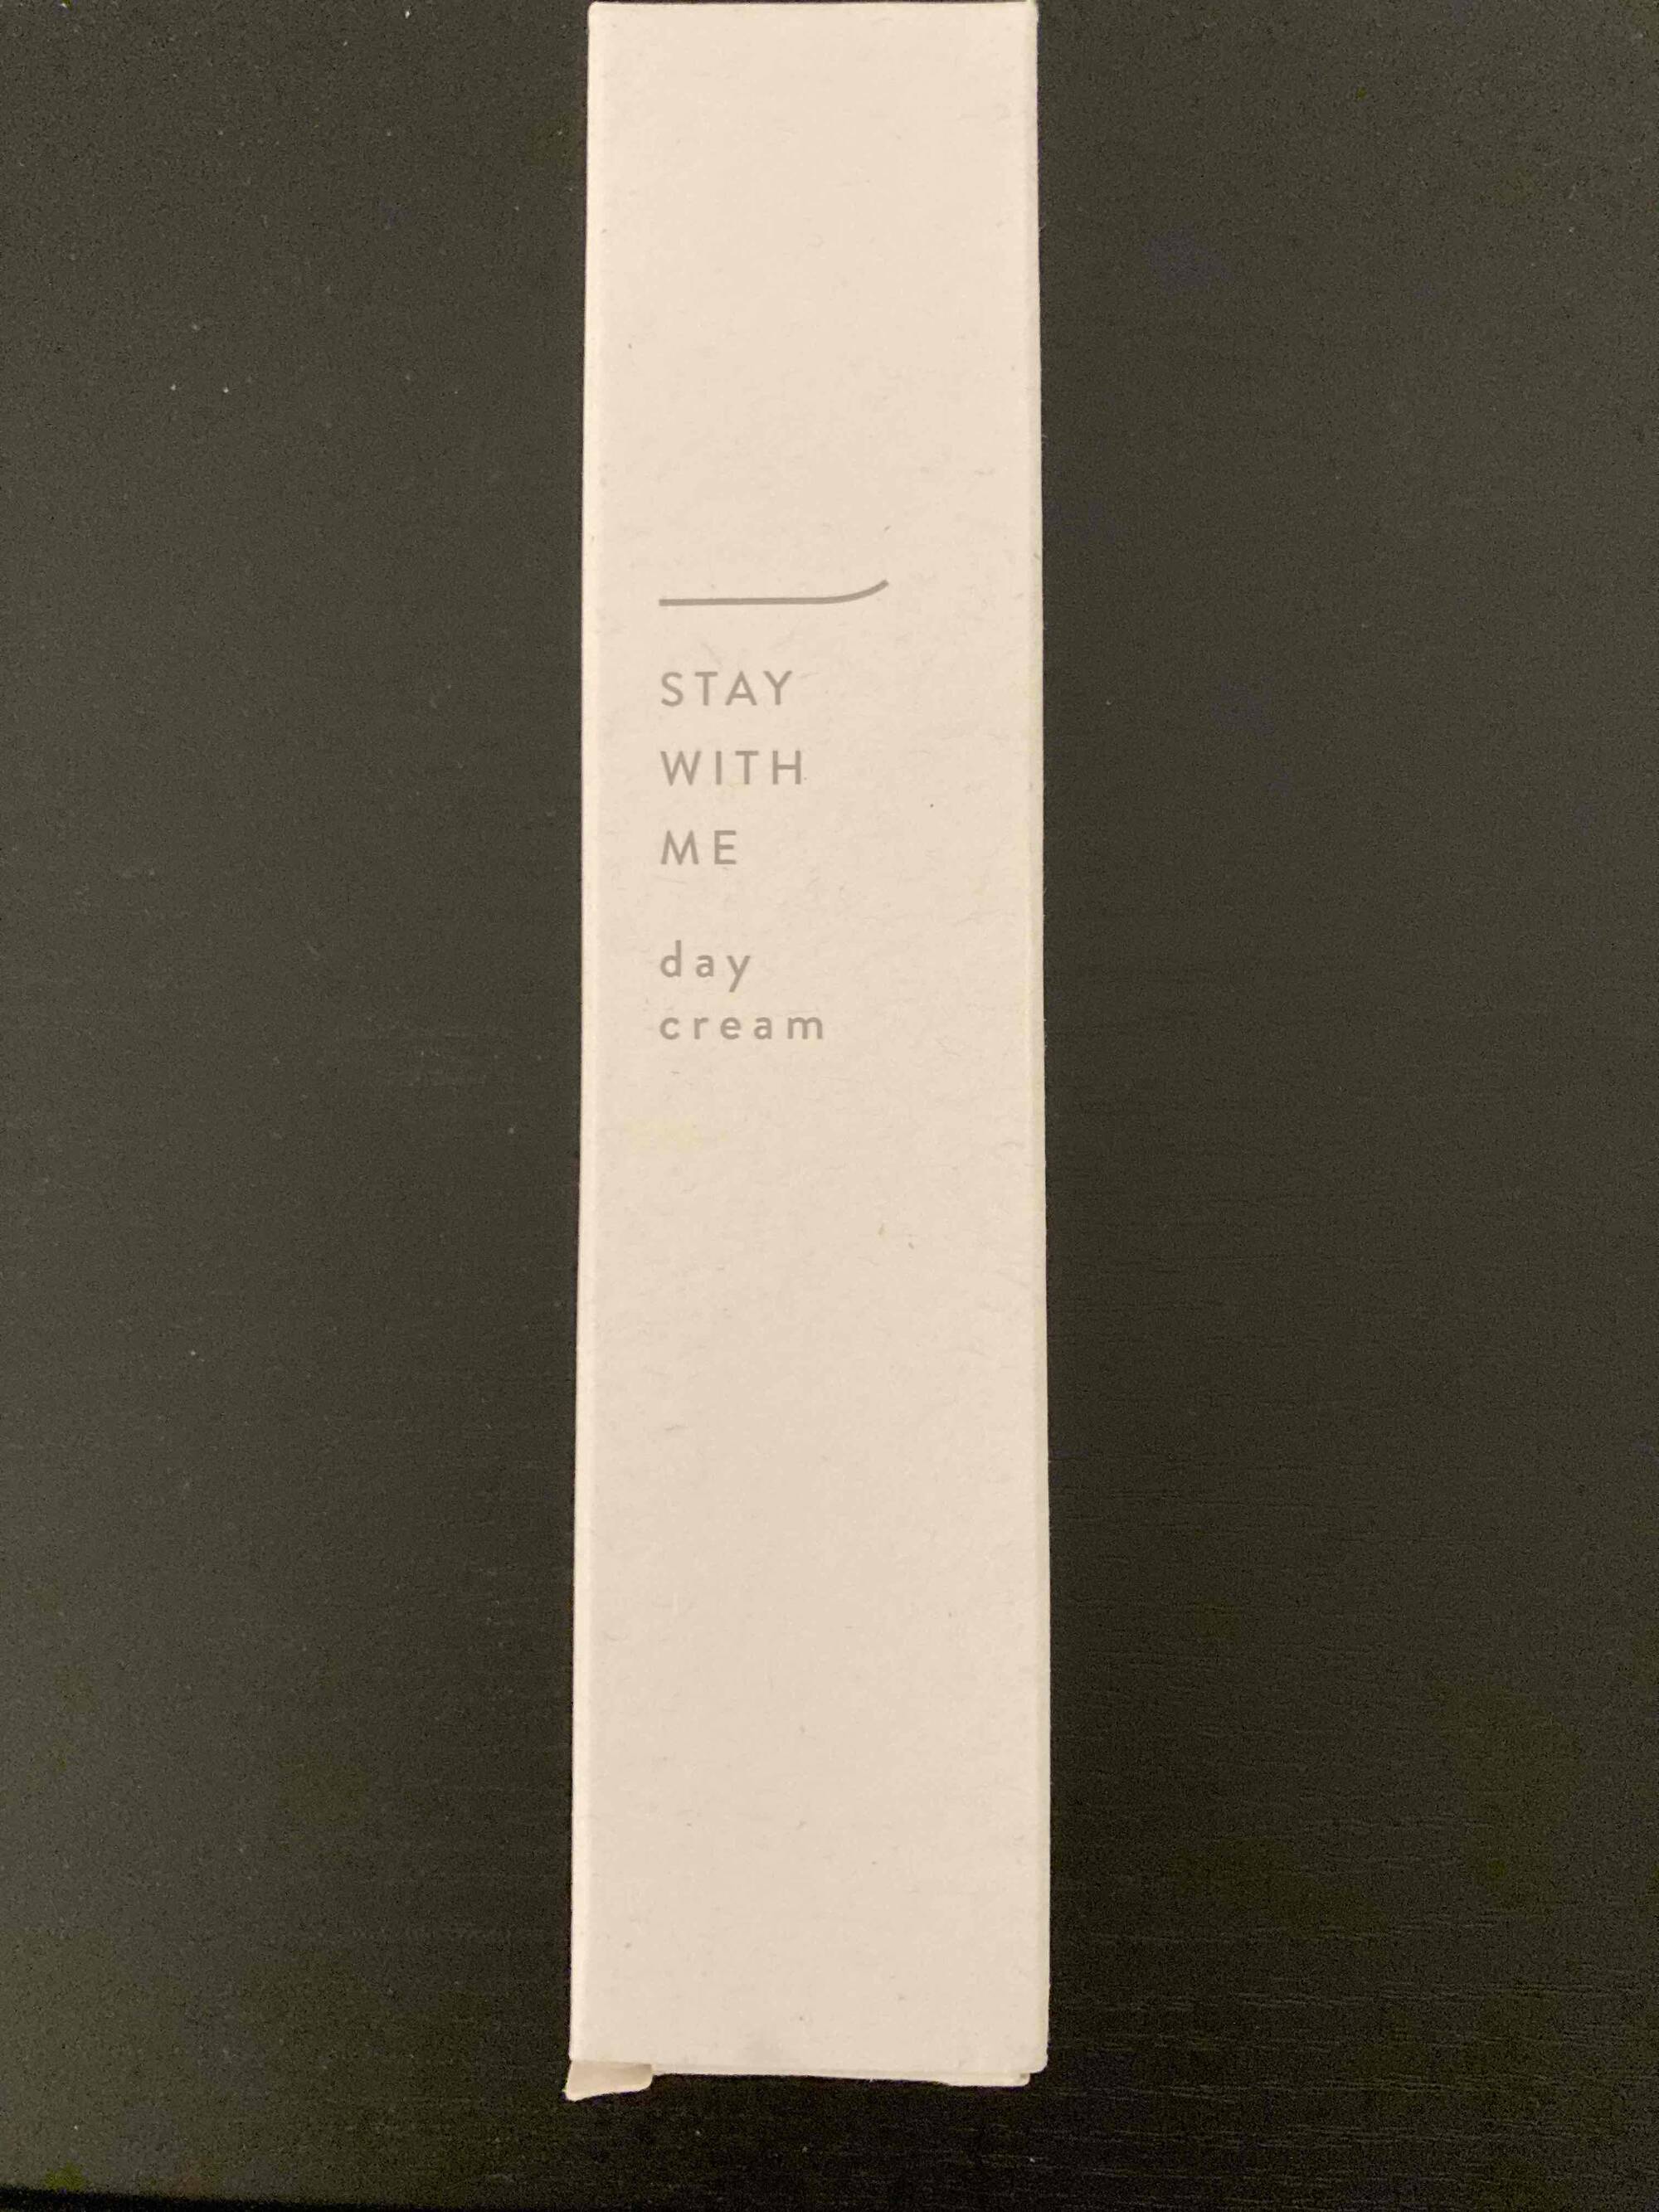 SIORIS - Stay with me day cream